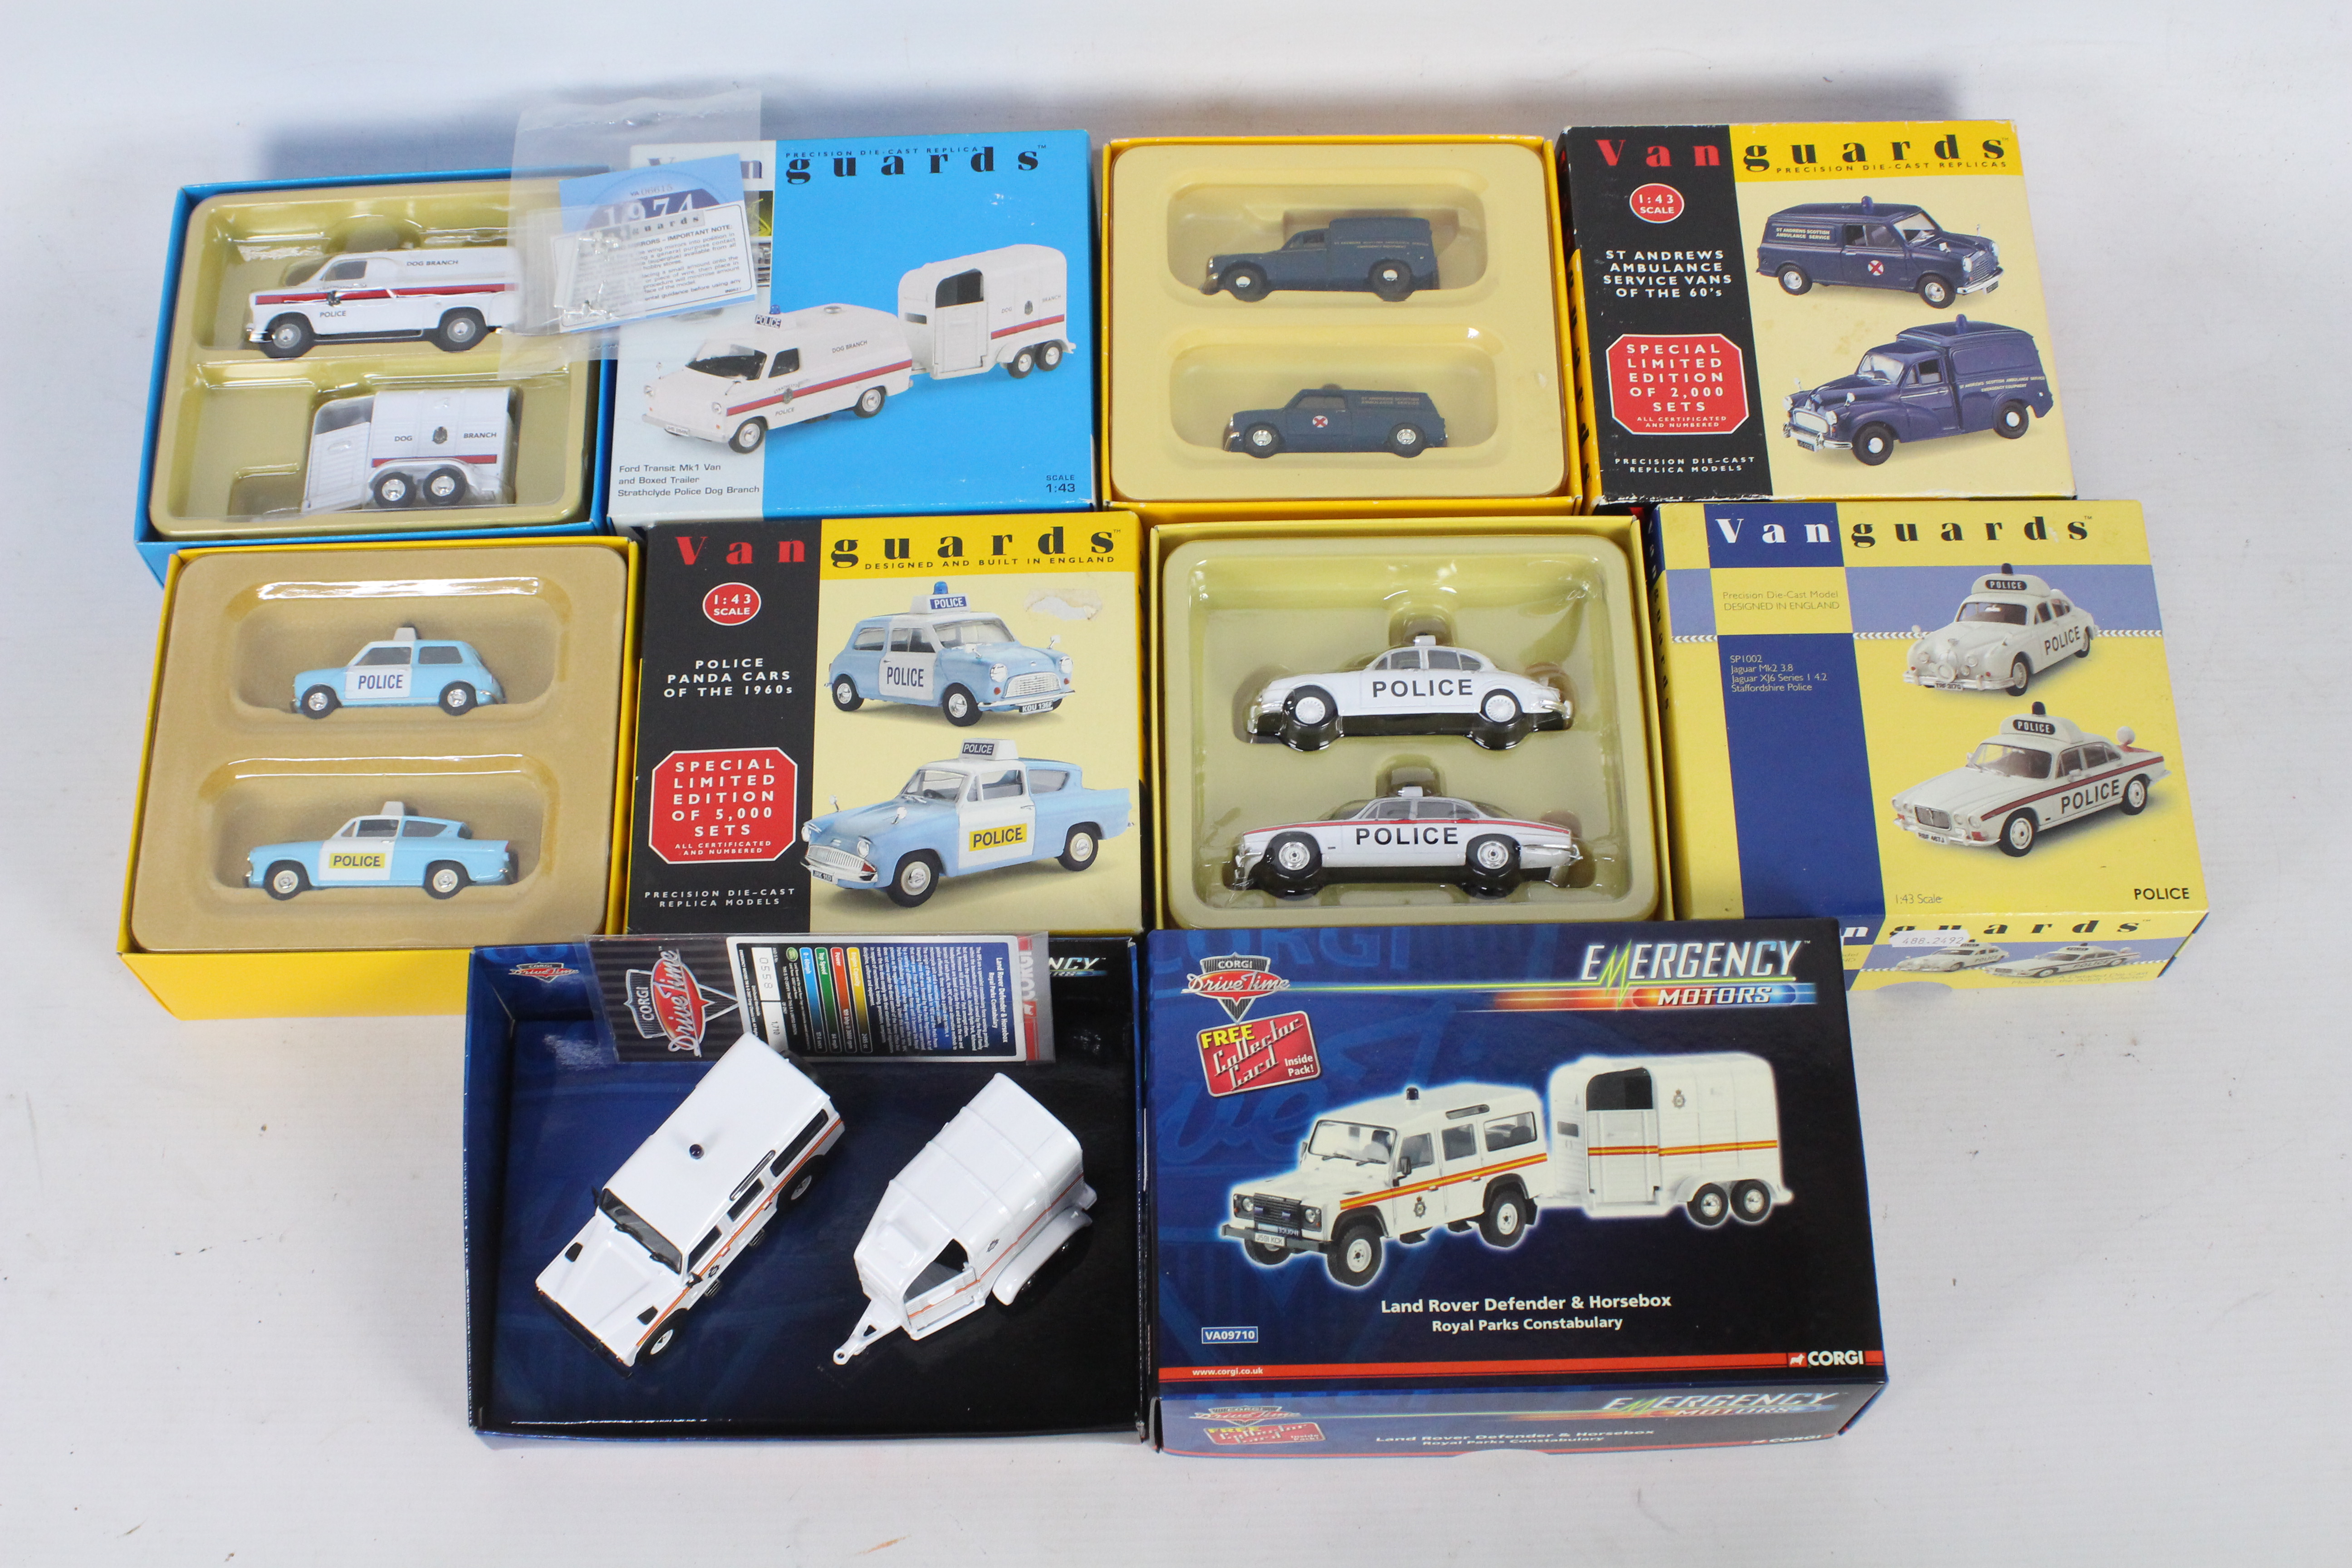 Vanguards - Five boxed Vanguards Limited Edition diecast model Police / emergency vehicle sets.